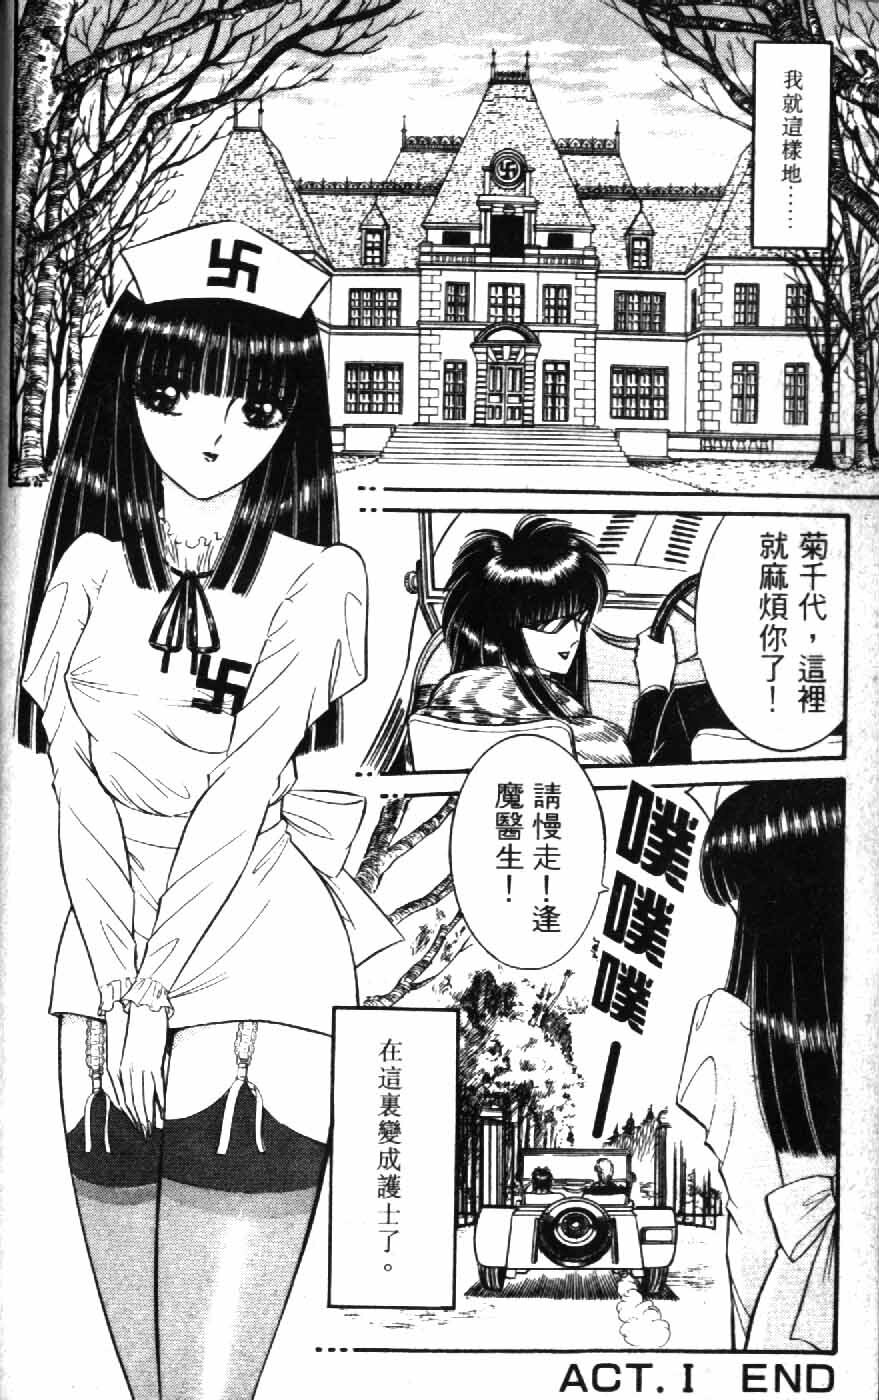 [Senno Knife] Ouma ga Horror Show 1 - Trans Sexual Special Show 1 | 顫慄博覽會 1 [Chinese] page 22 full